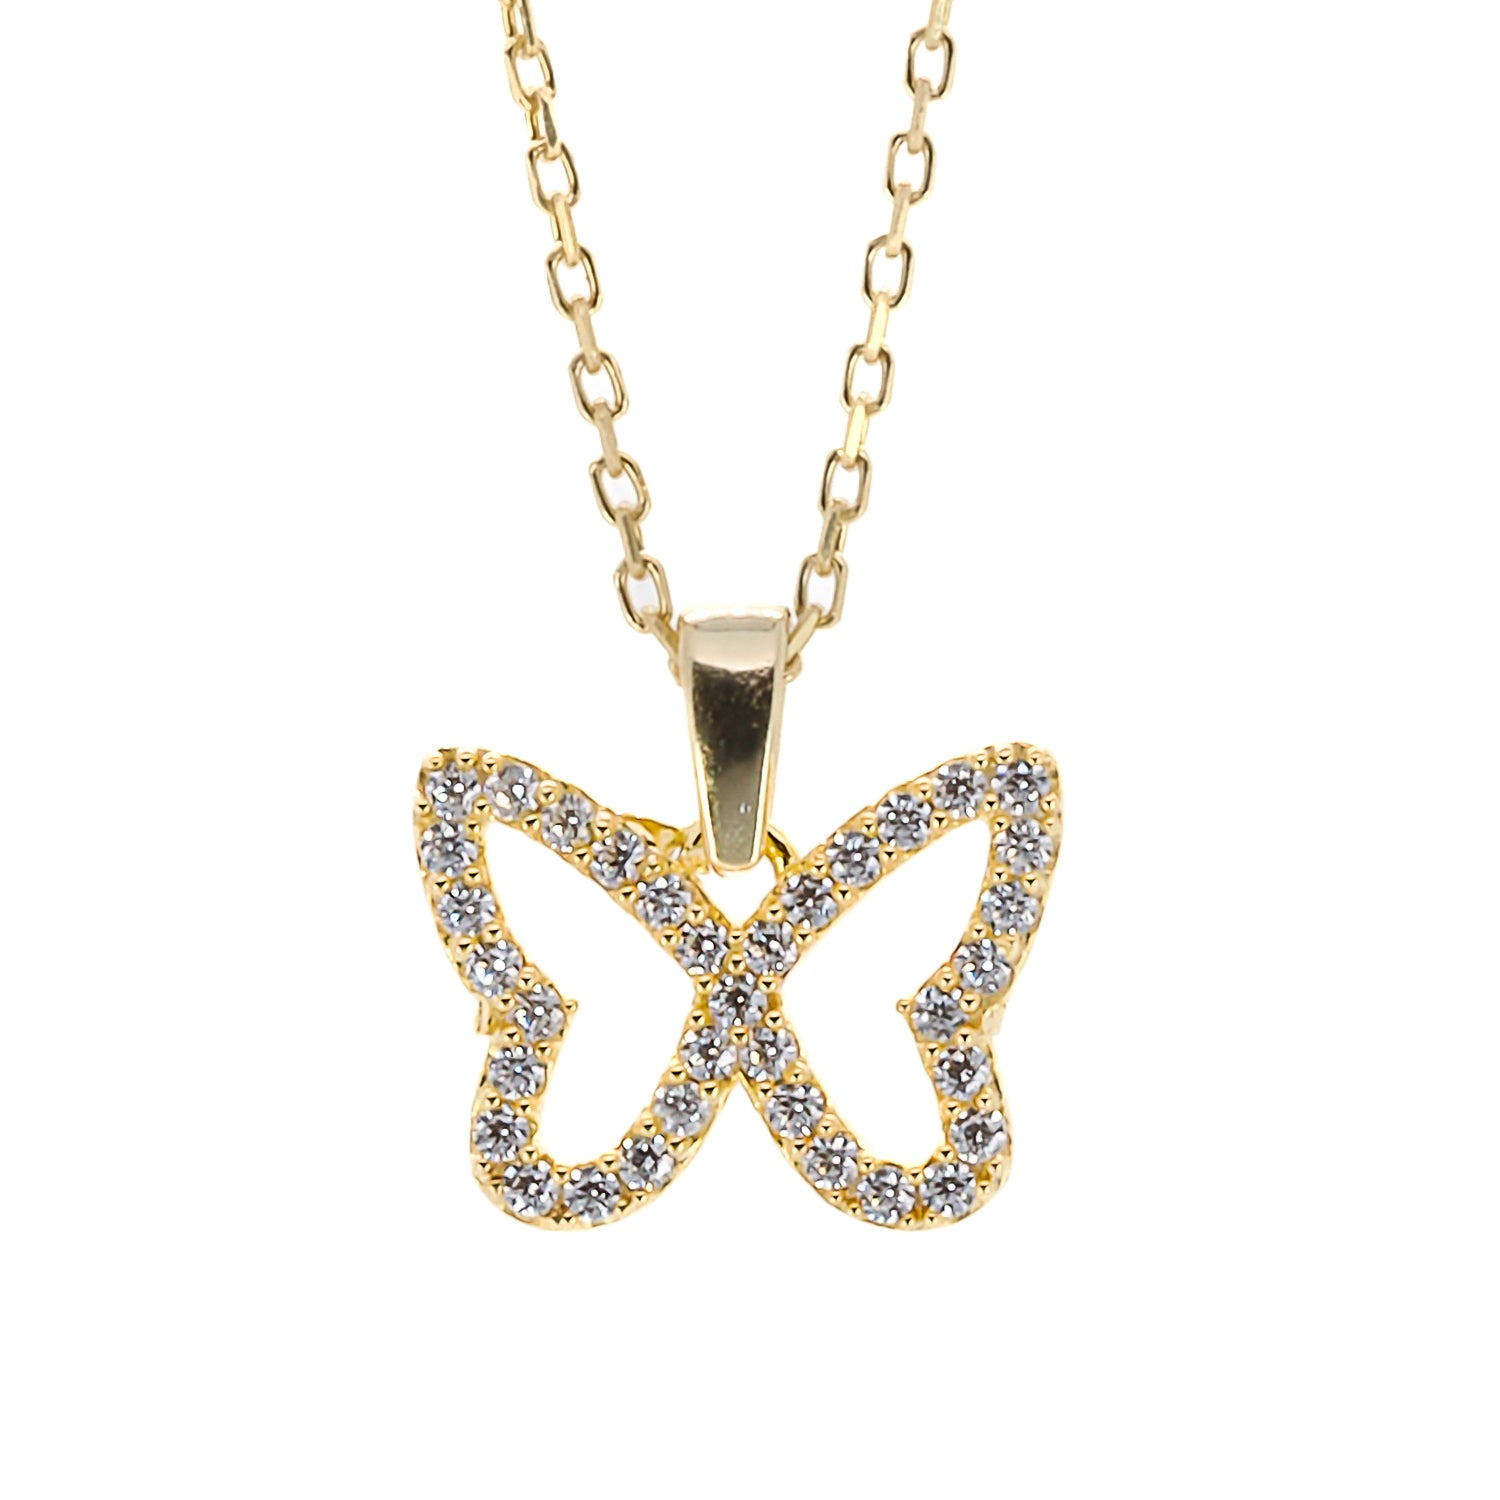 A close-up of the CZ diamond-adorned butterfly pendant on the Gold Sparkly Butterfly Necklace.